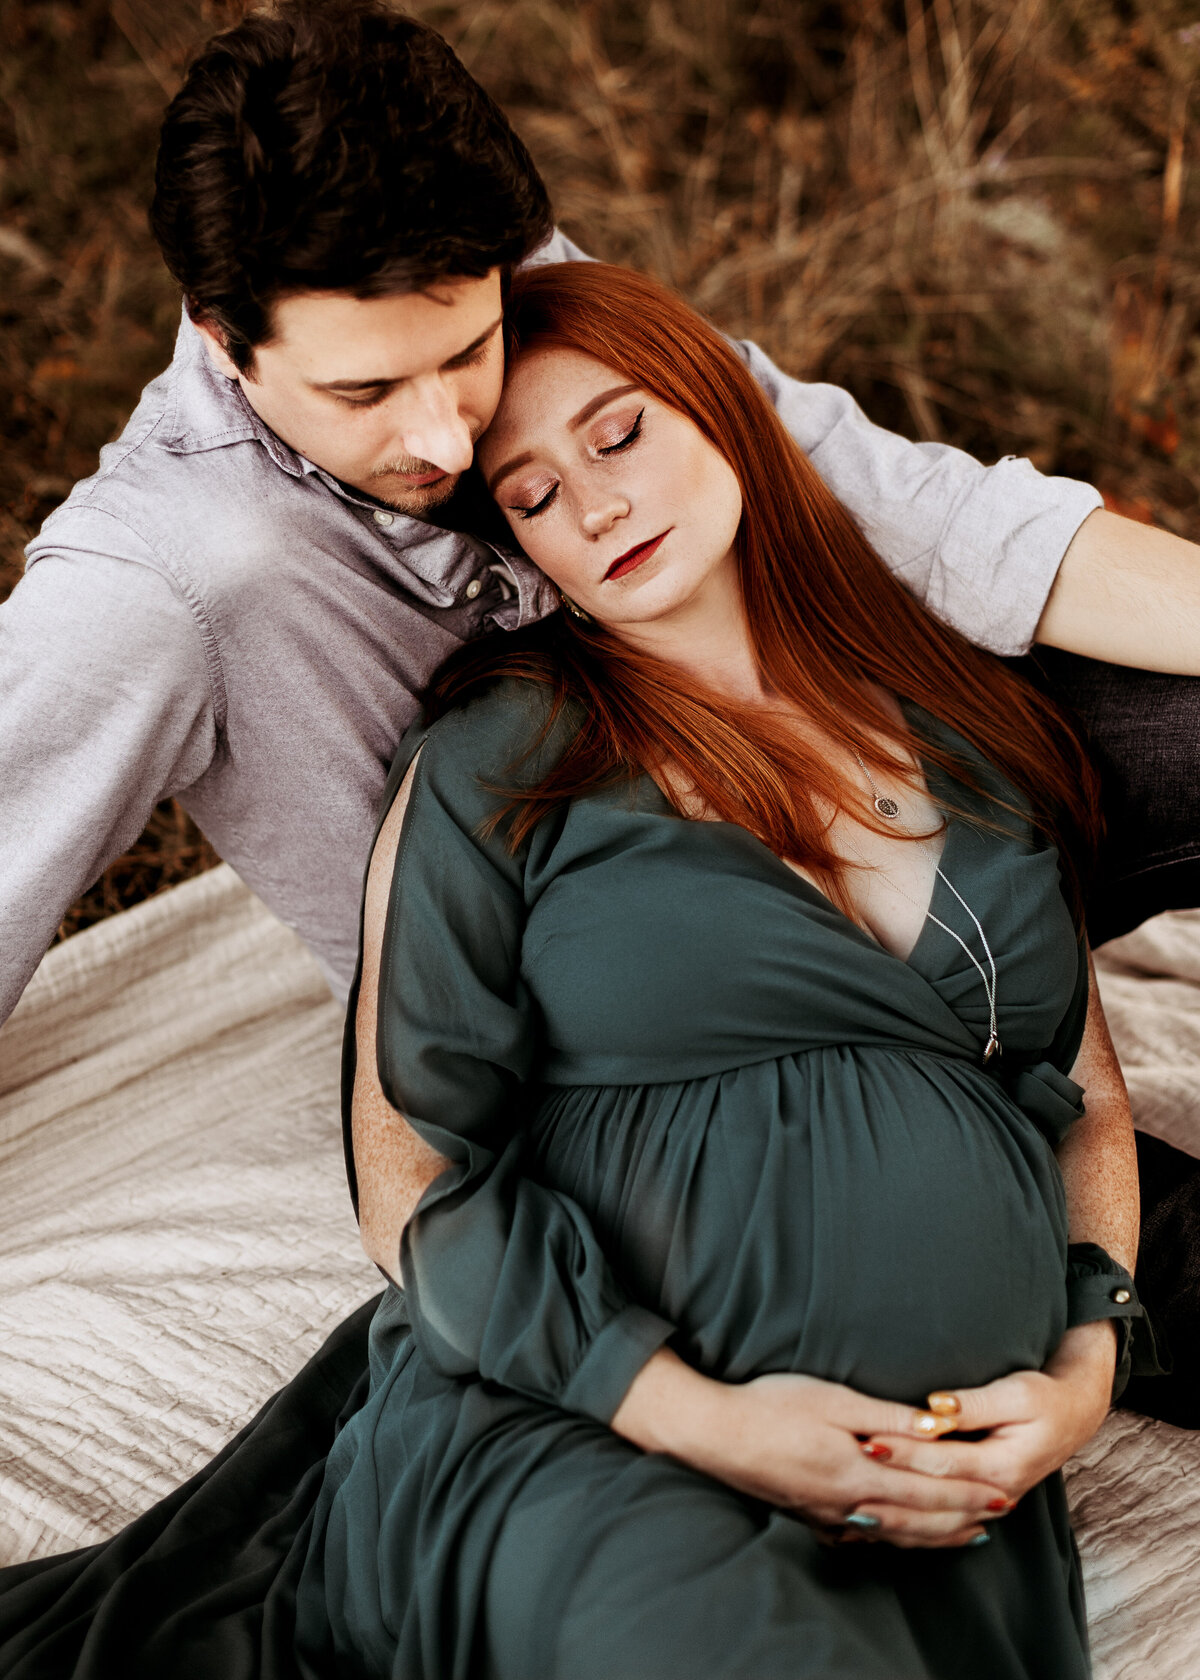 Sweet couples maternity photography session in  boulder colorado foothills